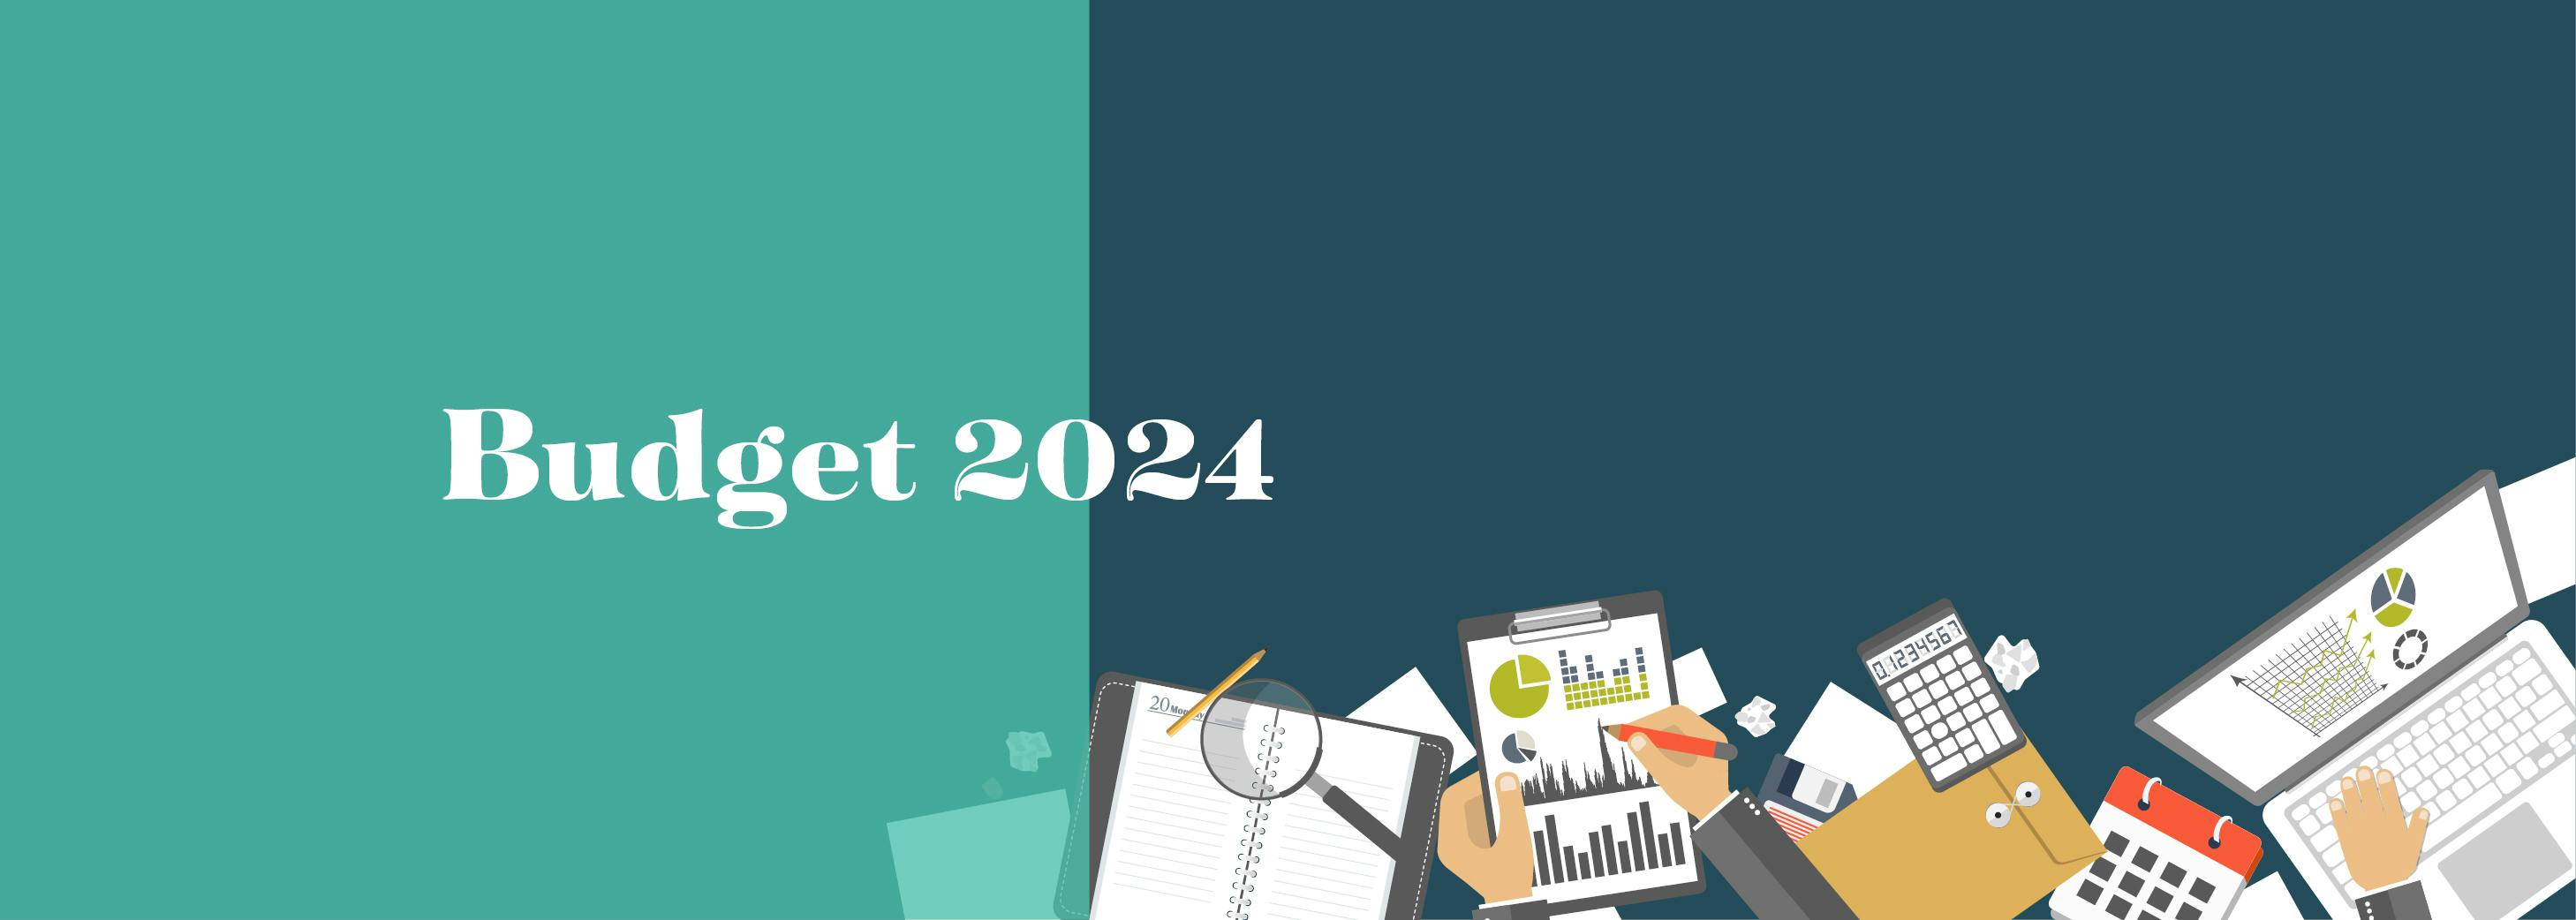 Graphic with text that says Budget 2024 and there are small white and grey finance graphics on a dark blue background